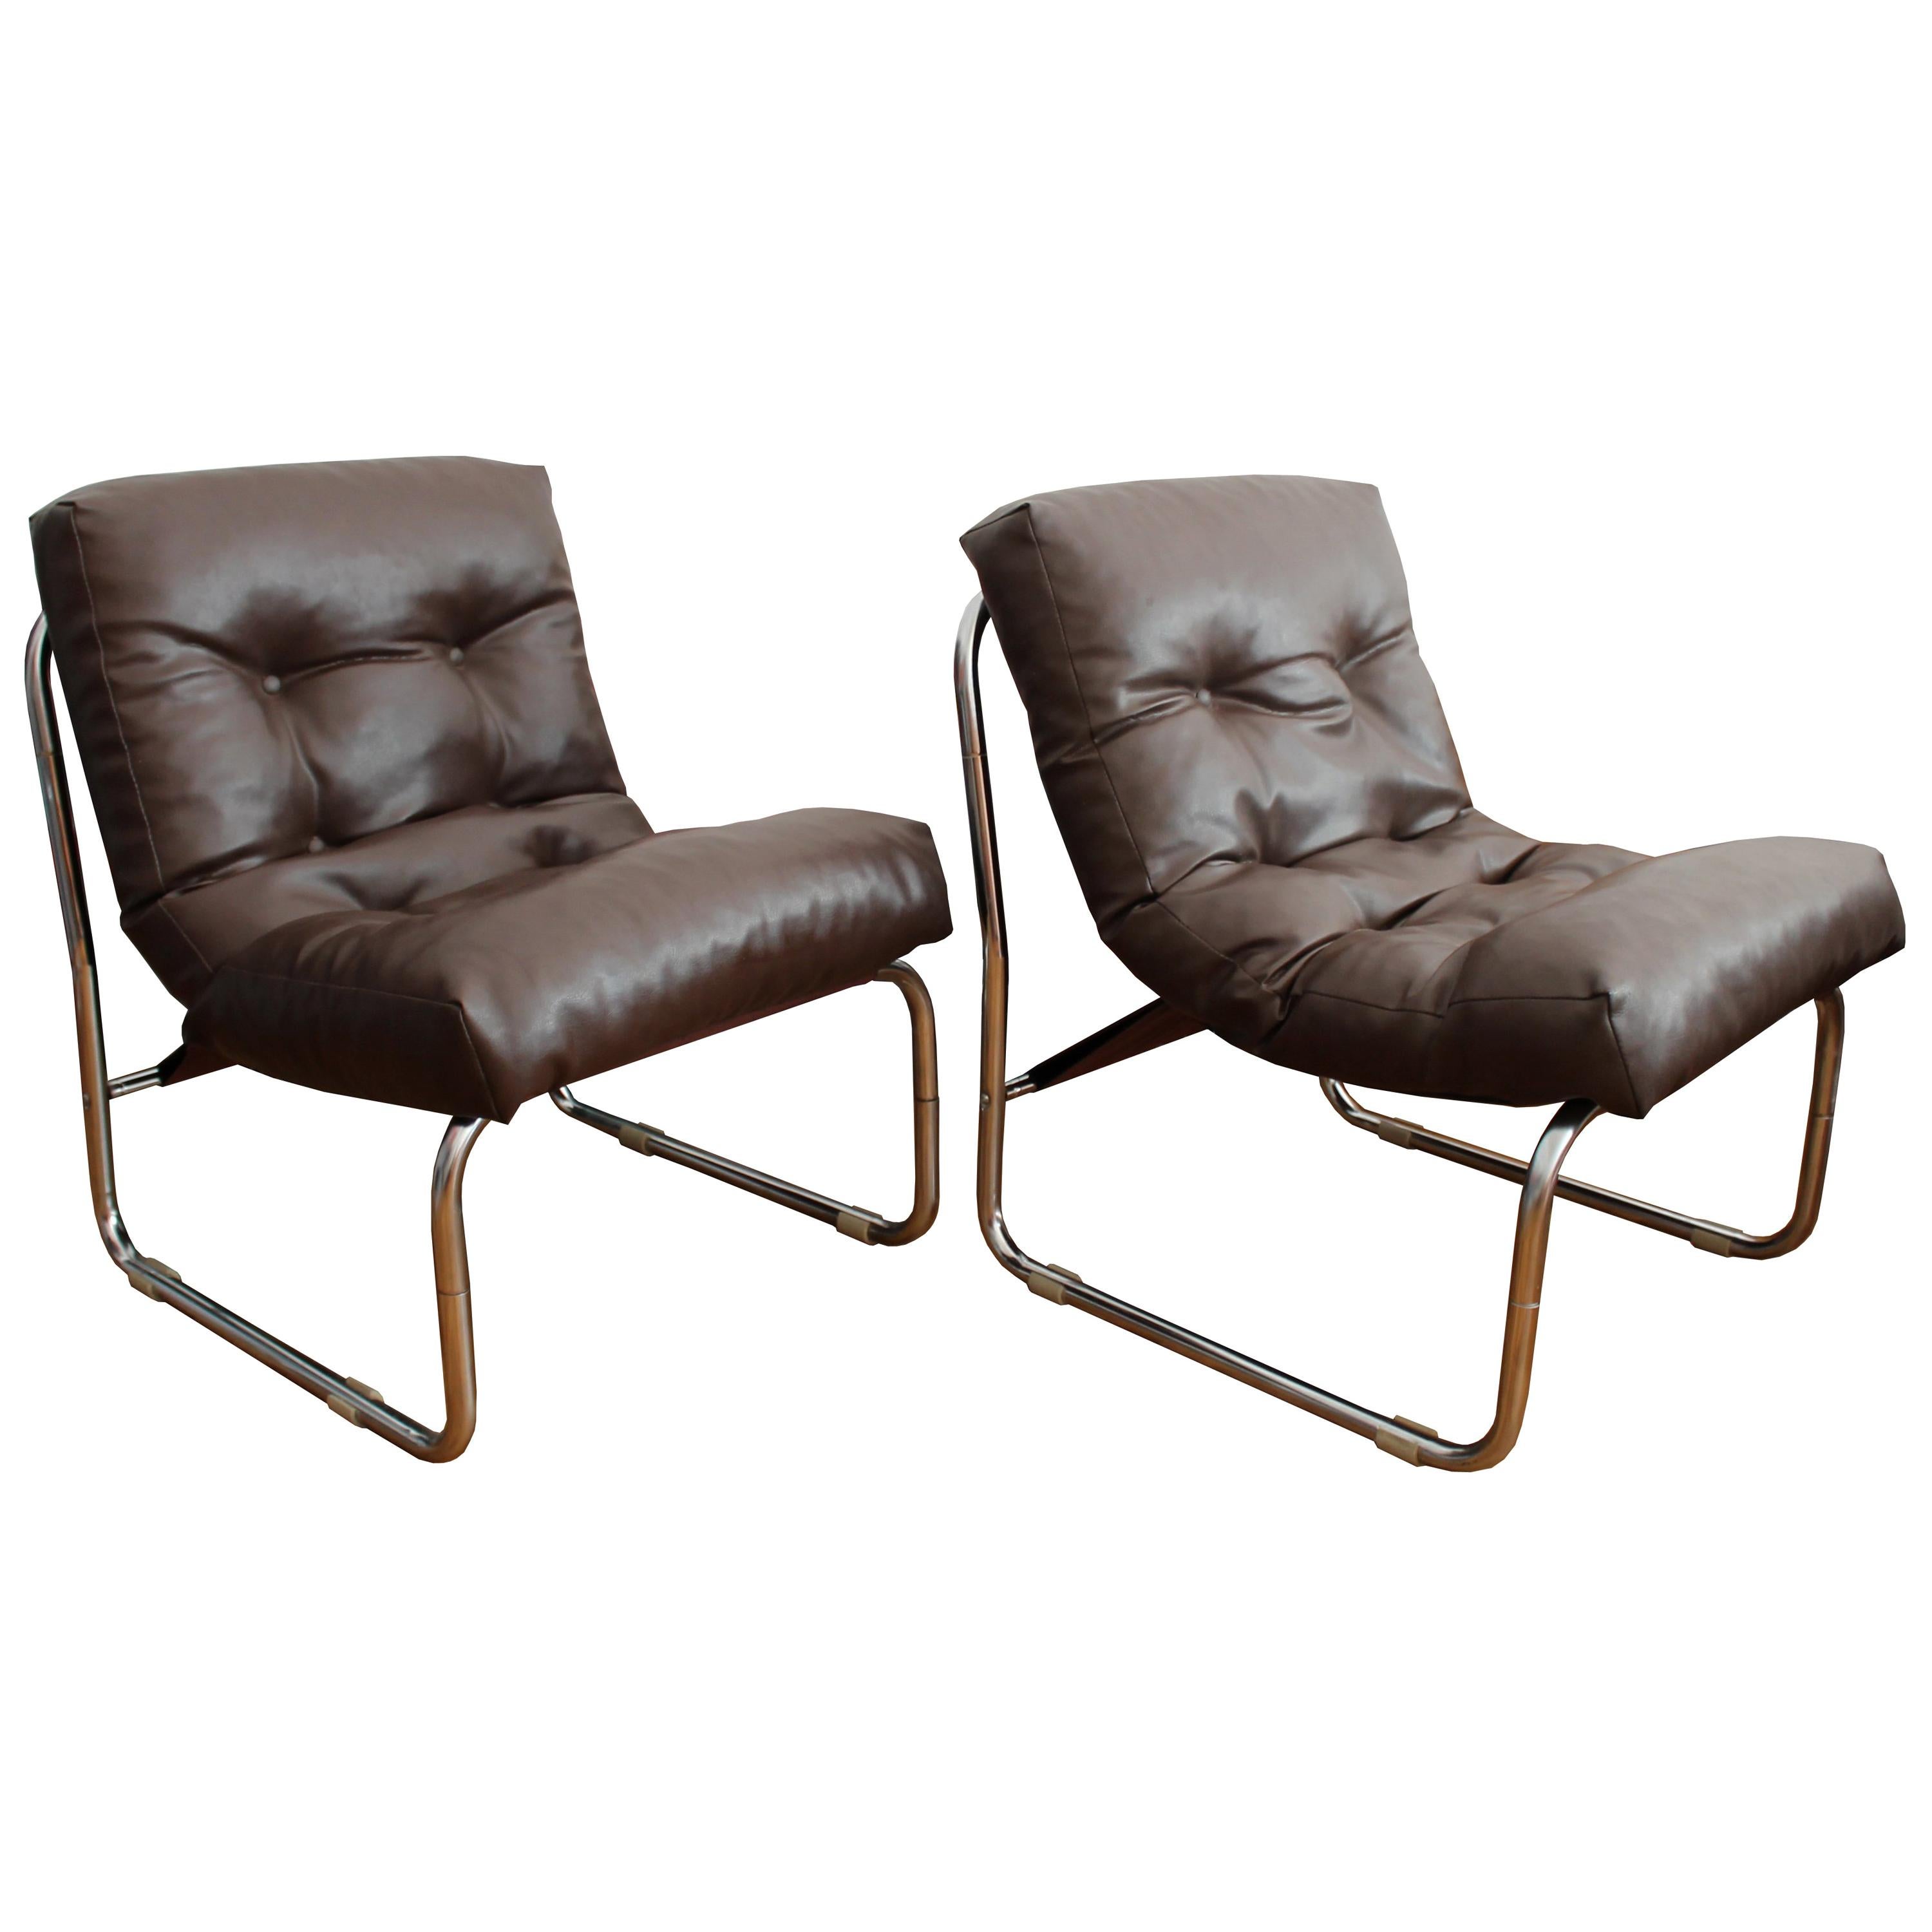 Pair of 1970s Neomodernist Tubular Leather Armchairs For Sale